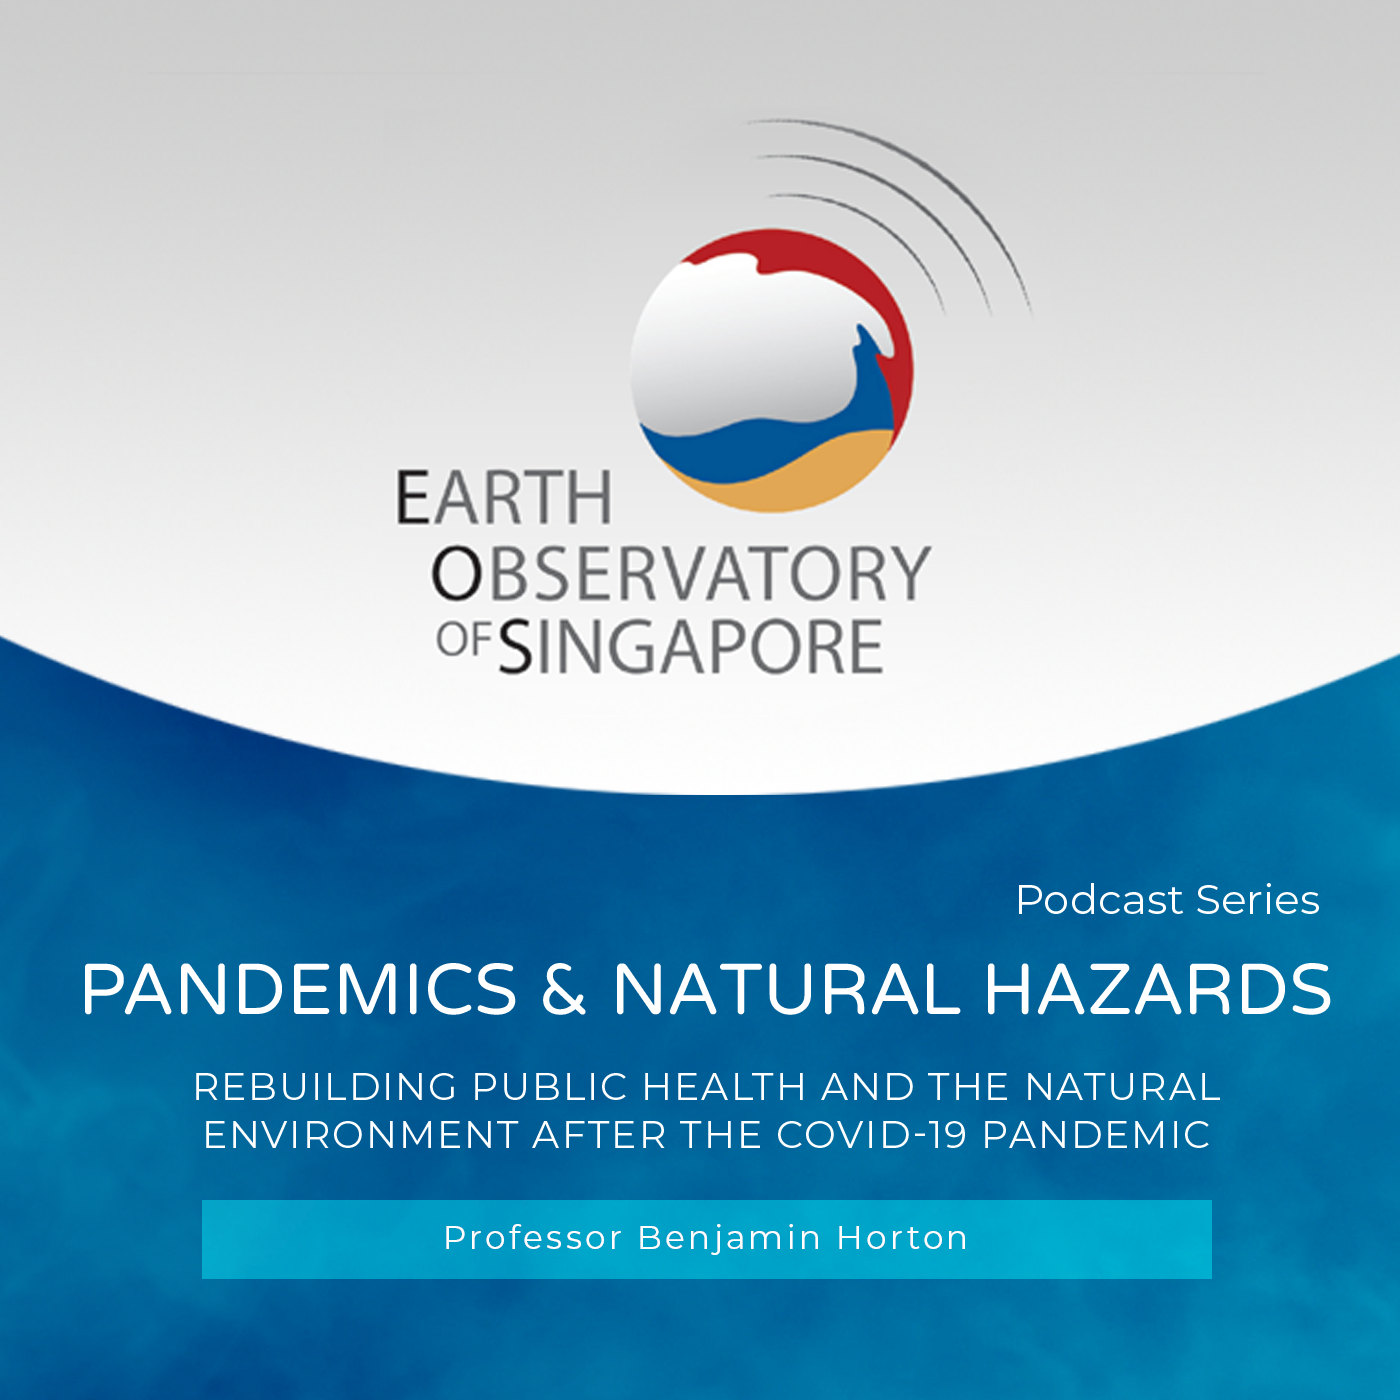 Episode 2: Rebuilding Public Health and the Natural Environment After the COVID-19 Pandemic